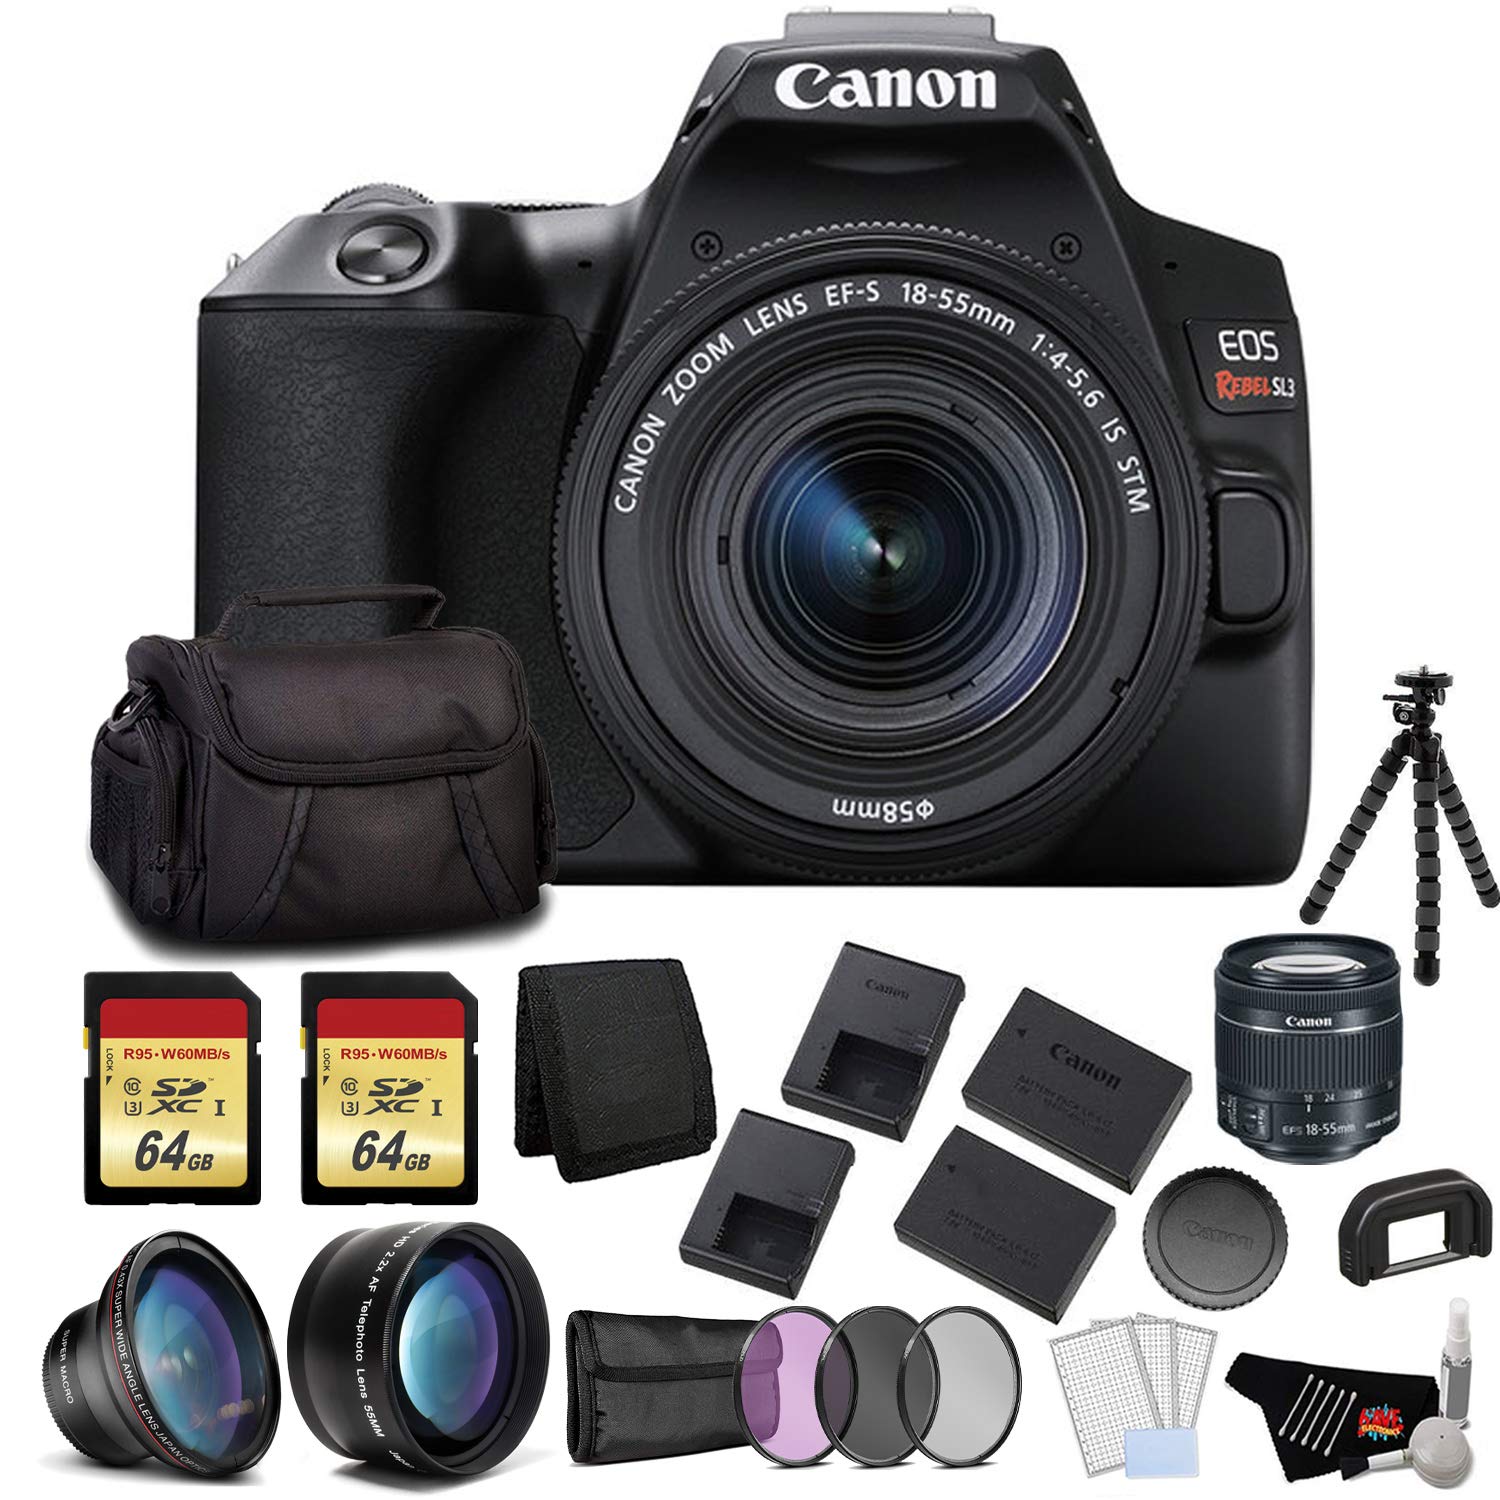 Canon EOS Rebel SL3 DSLR Camera with 18-55mm Lens (Black) Bundle with 2x64GB Memory Card + Battery for CanonLPE17 + LCD